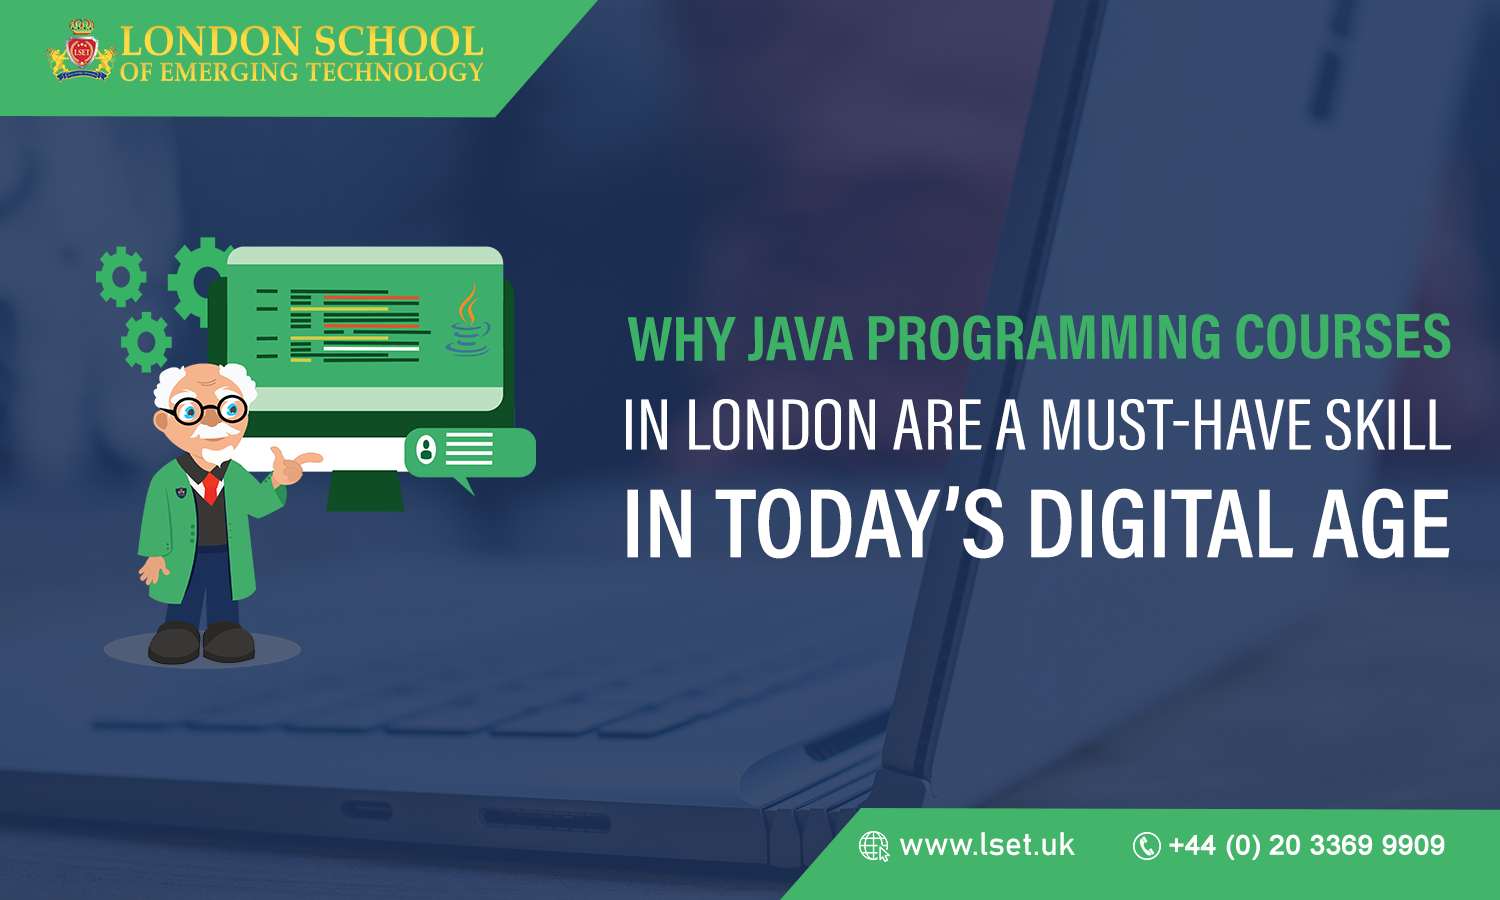 Why Java Programming Courses in London Are a Must-Have Skill in Today’s Digital Age